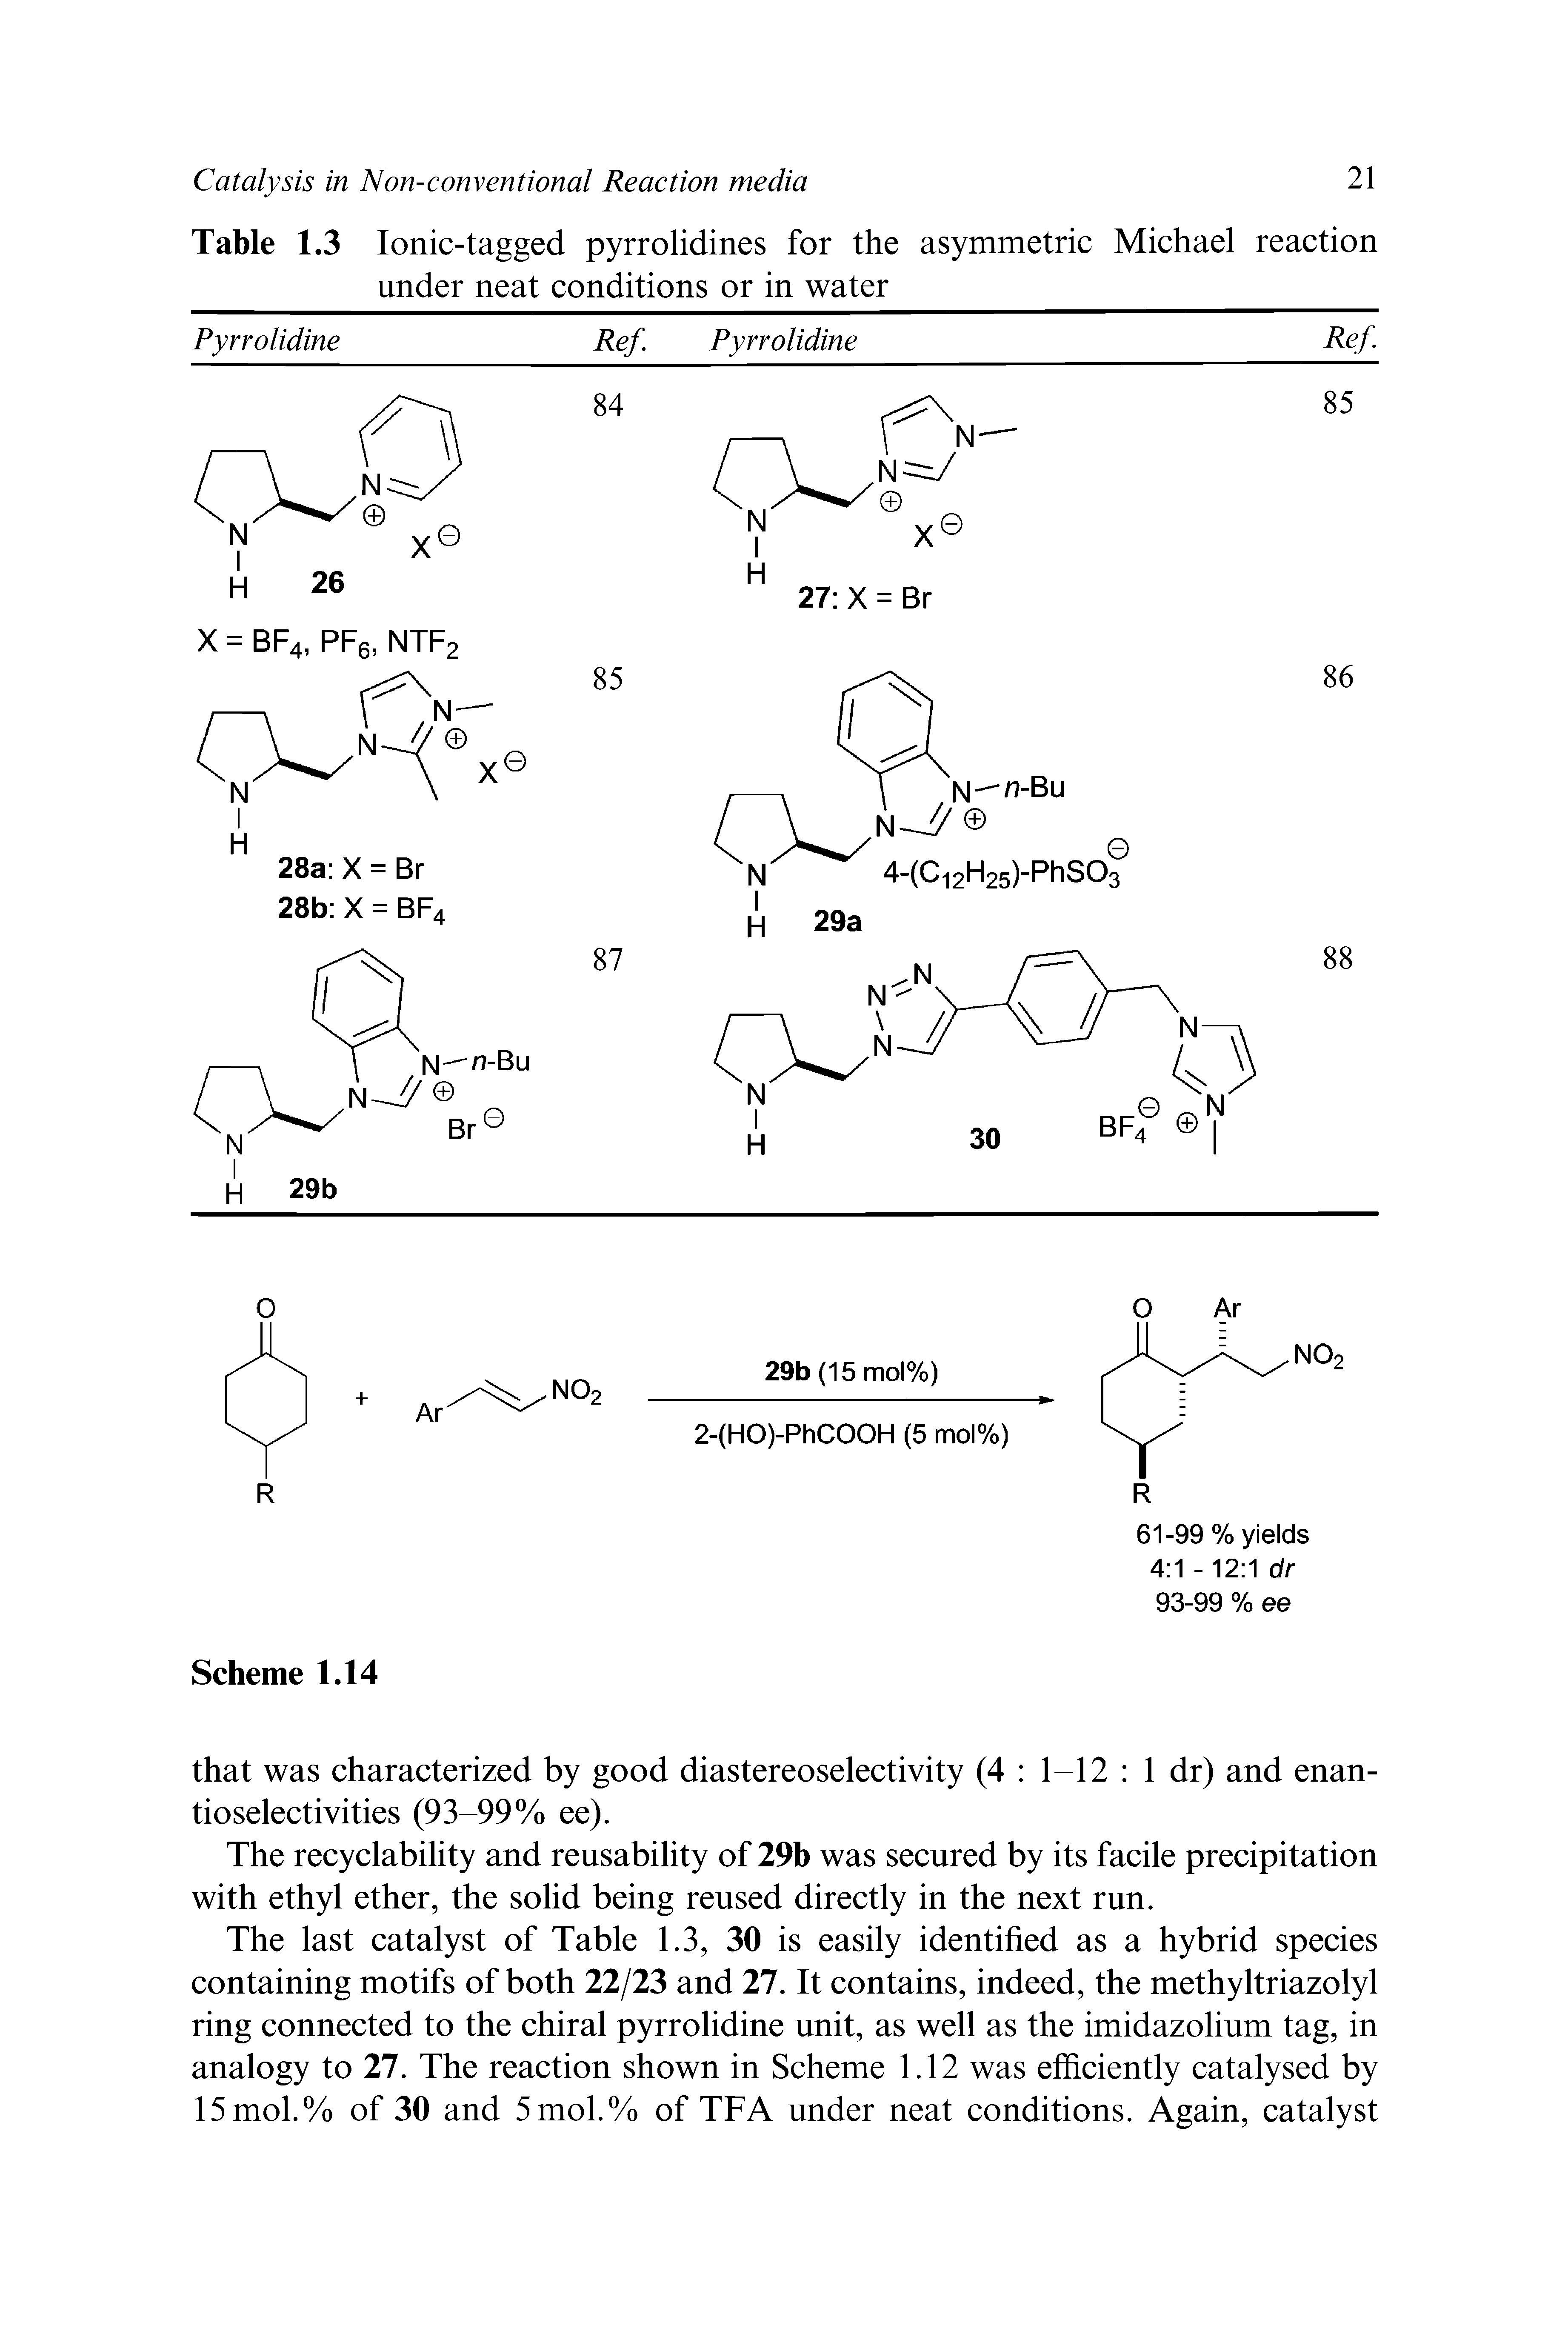 Table 1.3 Ionic-tagged pyrrolidines for the asymmetric Michael reaction under neat conditions or in water...